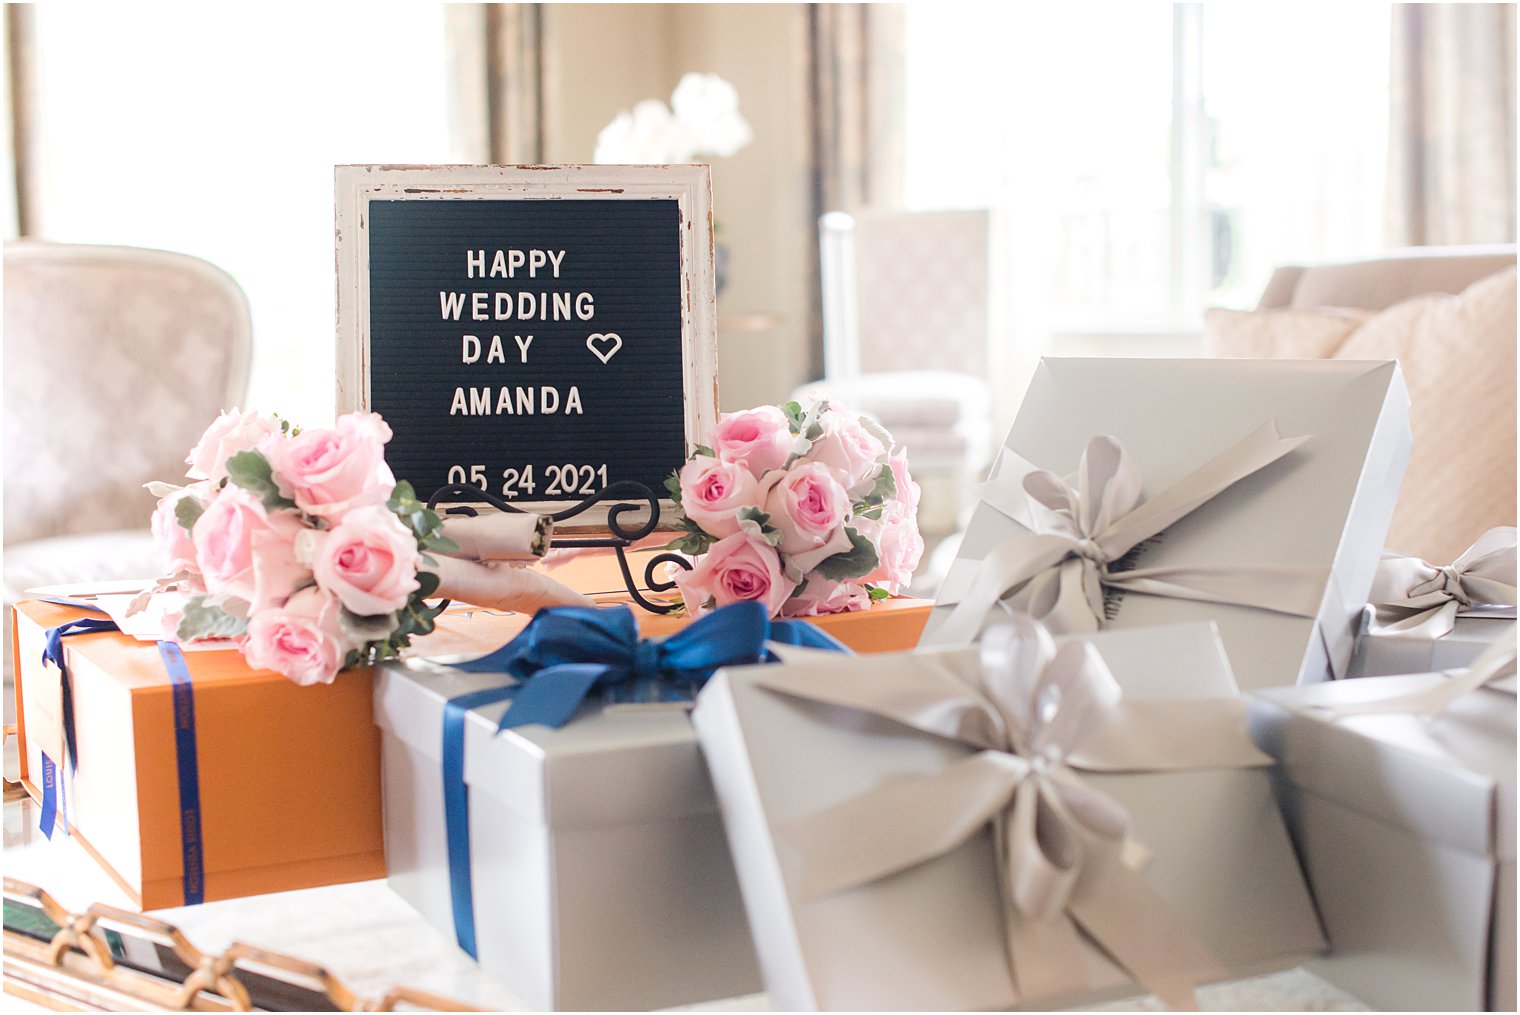 Gift opening on your wedding morning: a perfect photo opportunity for your wedding day shared by NJ wedding photographer Idalia Photography